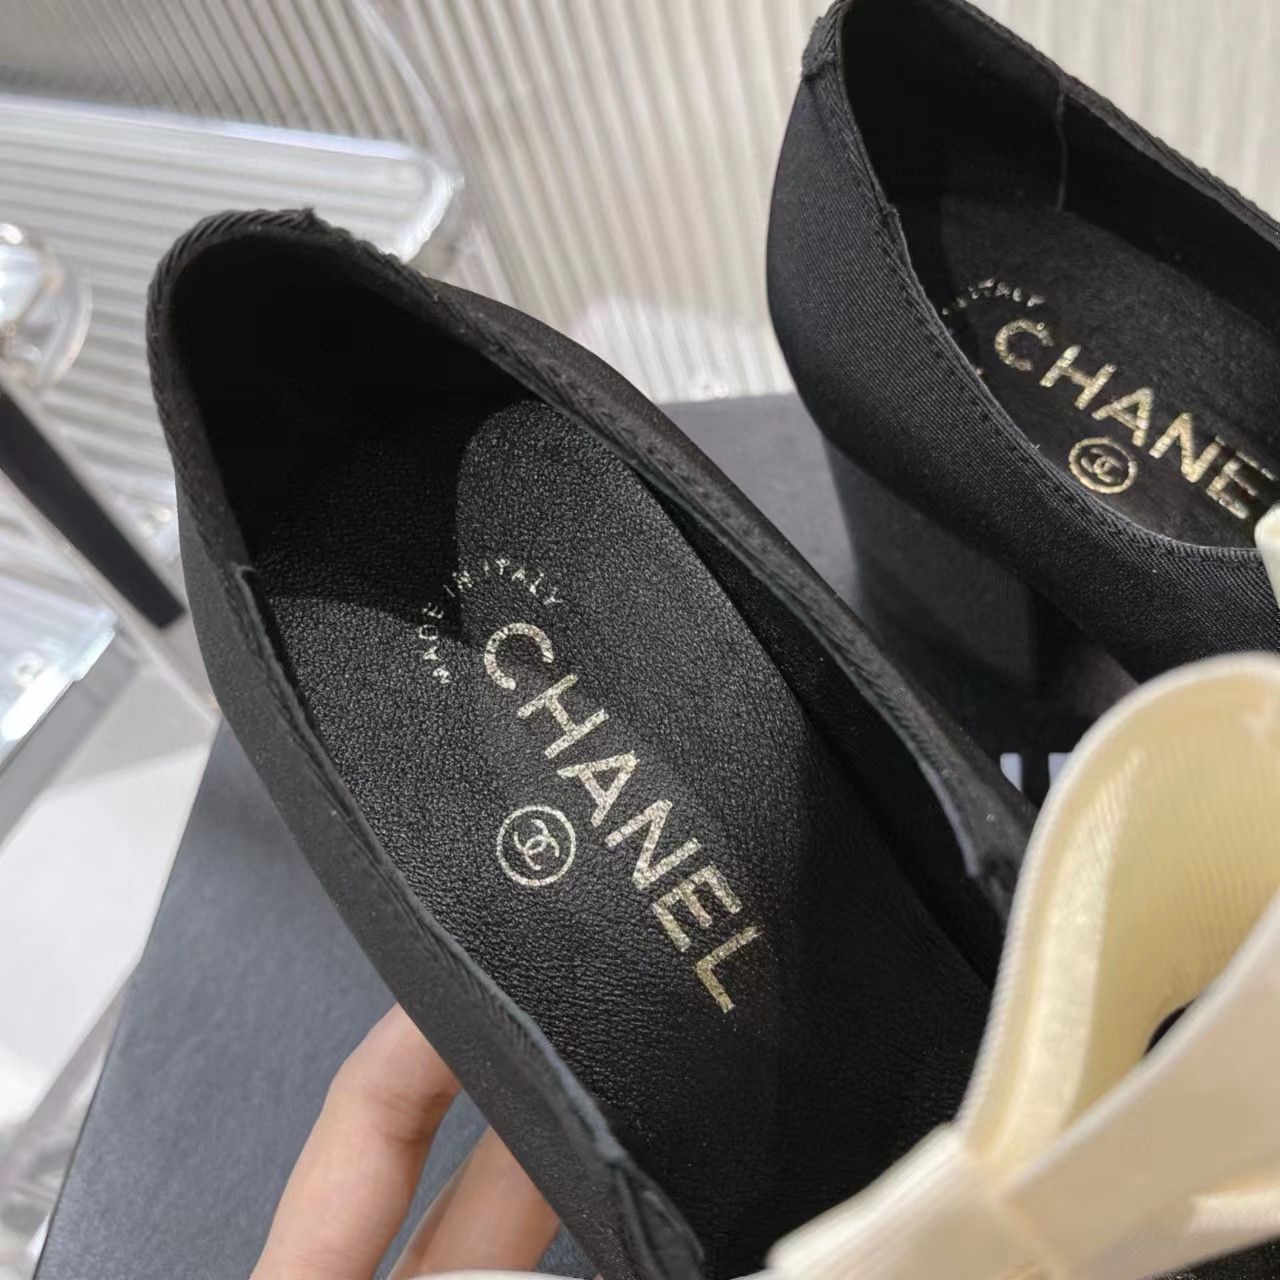 Chanel 24C Bow Mary Jane Shoes Original  Calf Leather 55MM Heels C85923 Black